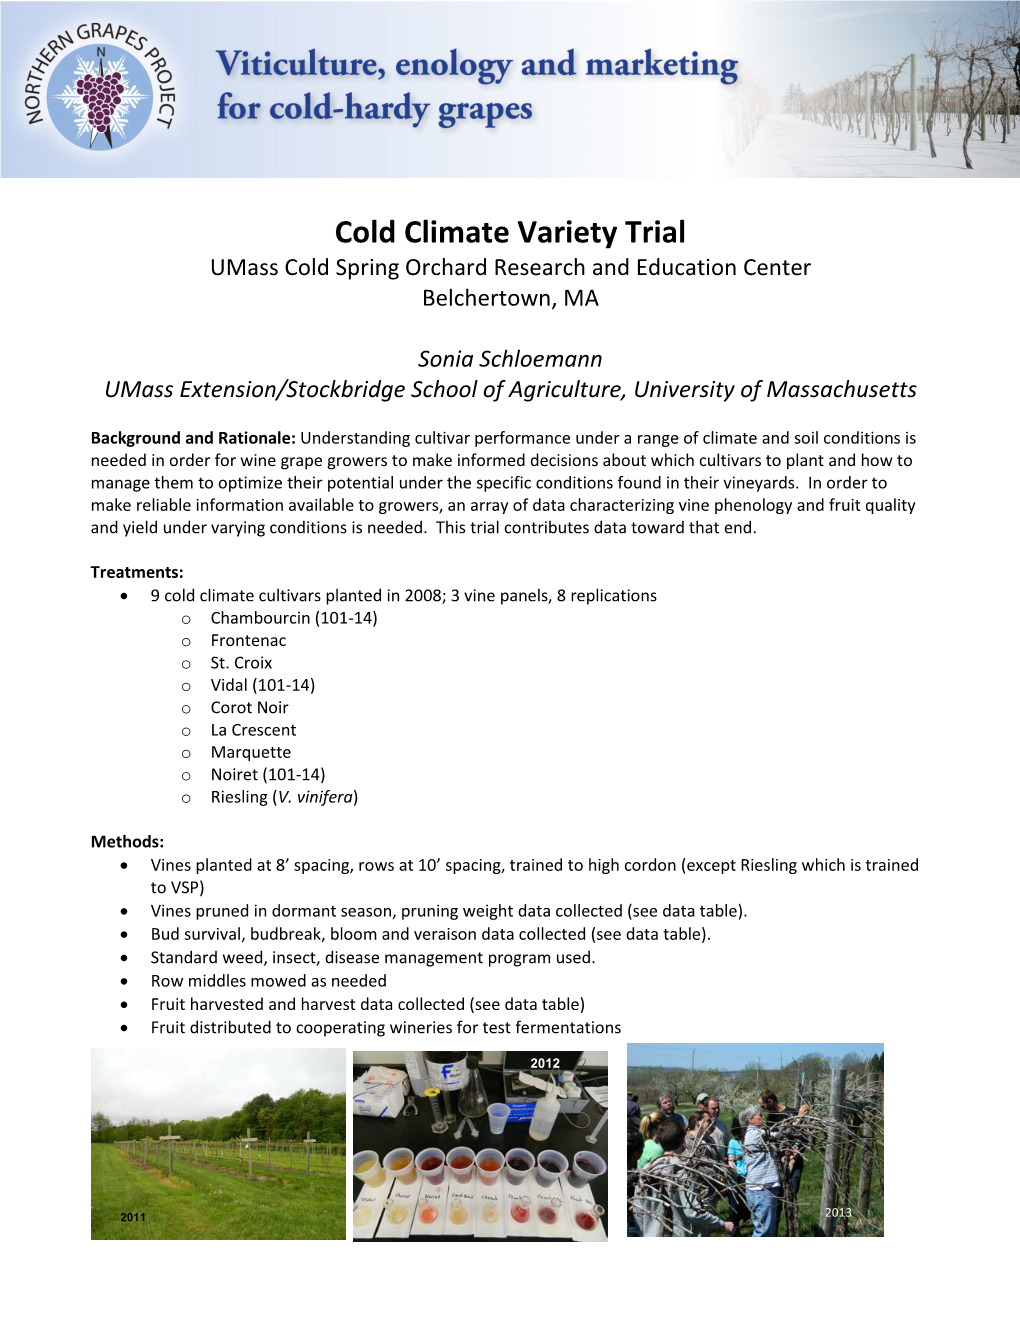 Cold Climate Variety Trial Umass Cold Spring Orchard Research and Education Center Belchertown, MA